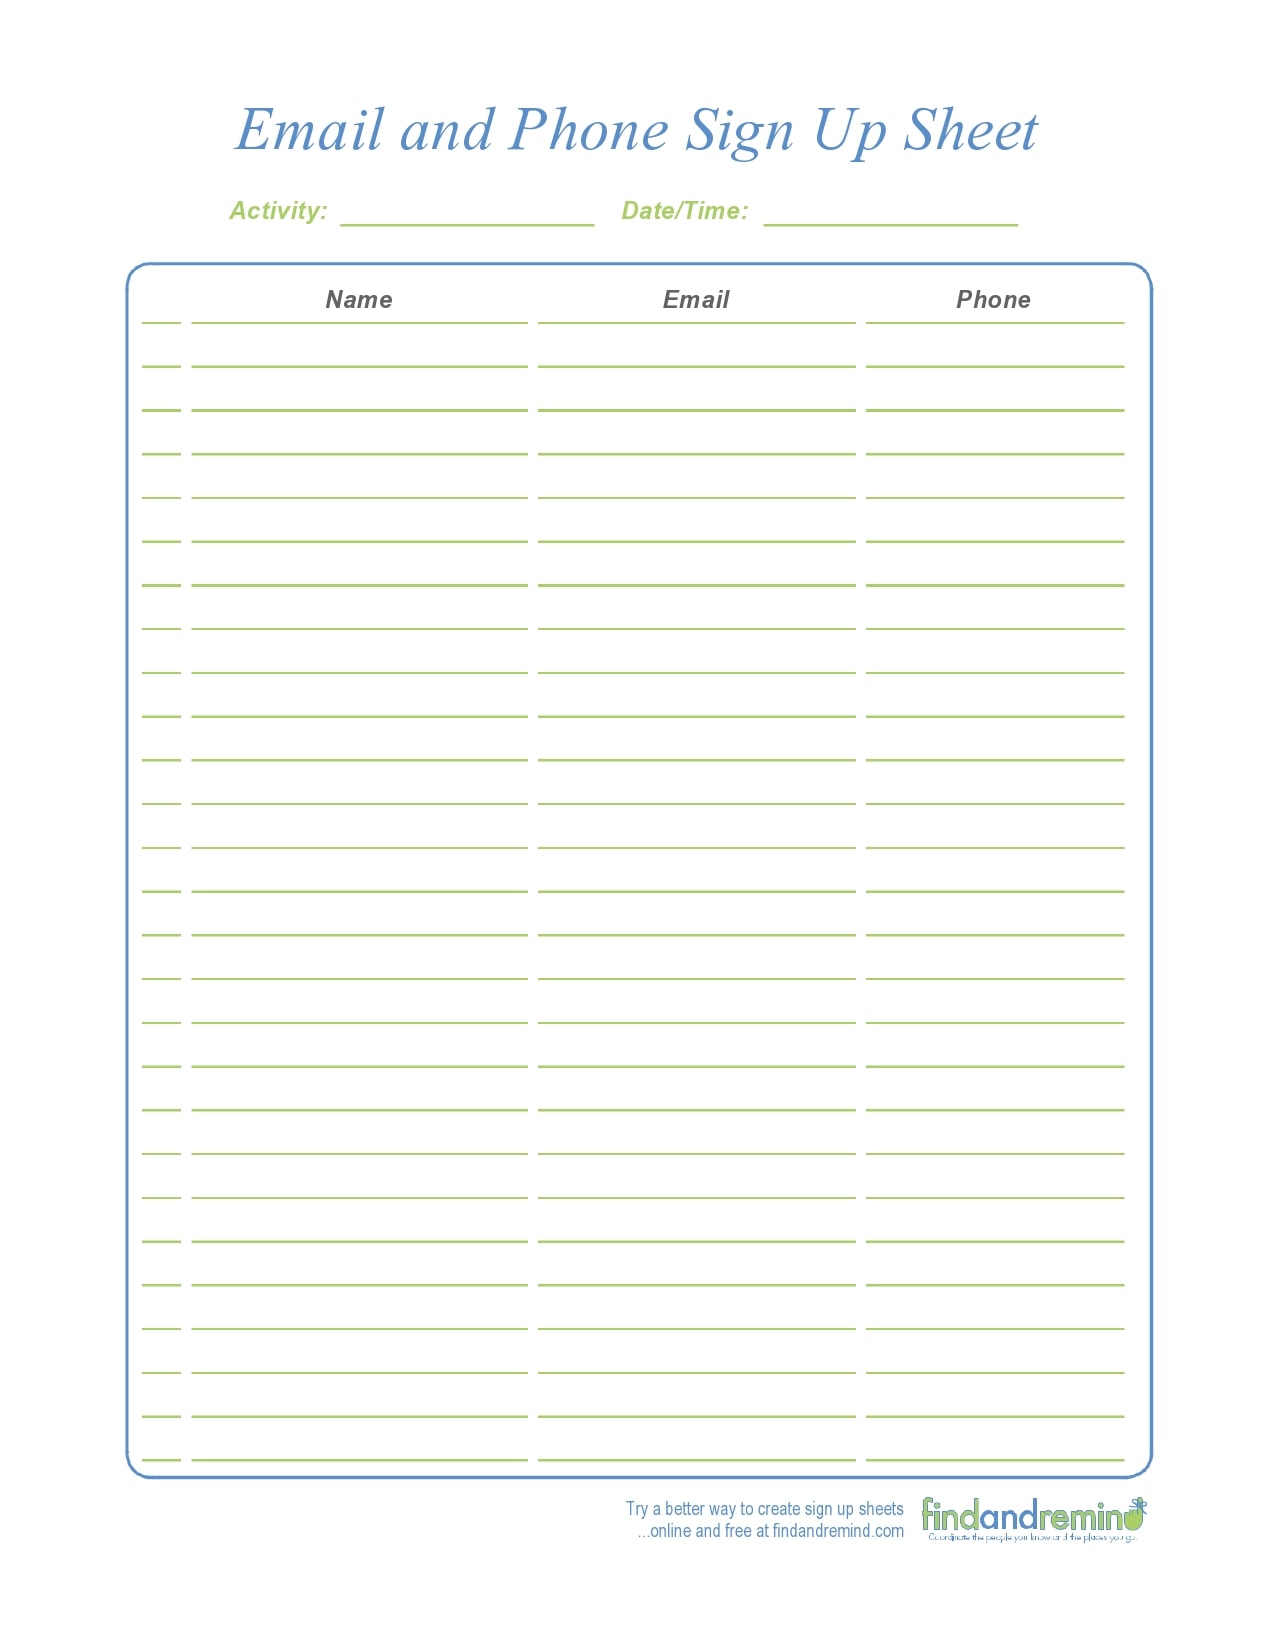 20 Best Email Sign Up Sheet Templates (Word/Excel) Regarding Free Sign Up Sheet Template Word